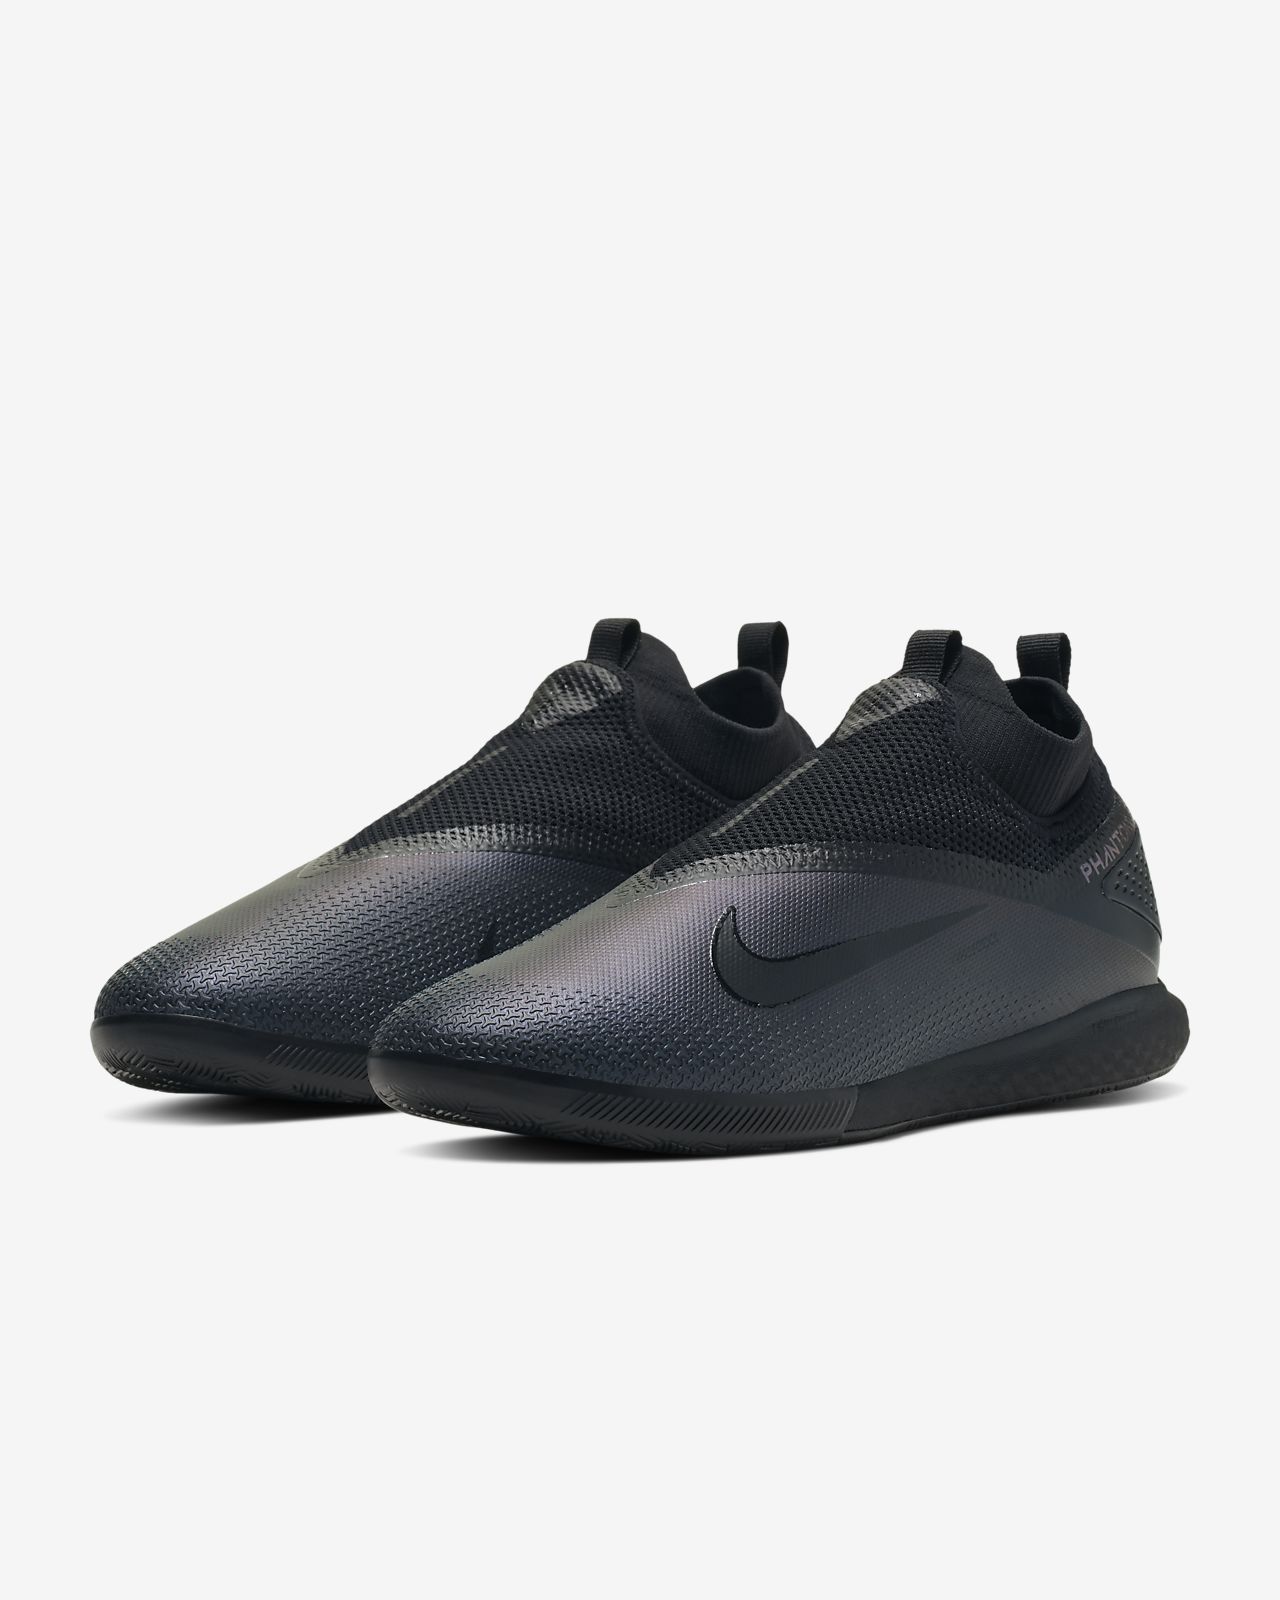 Nike Future Lab Collection Phantom Vision Pro Direct Soccer